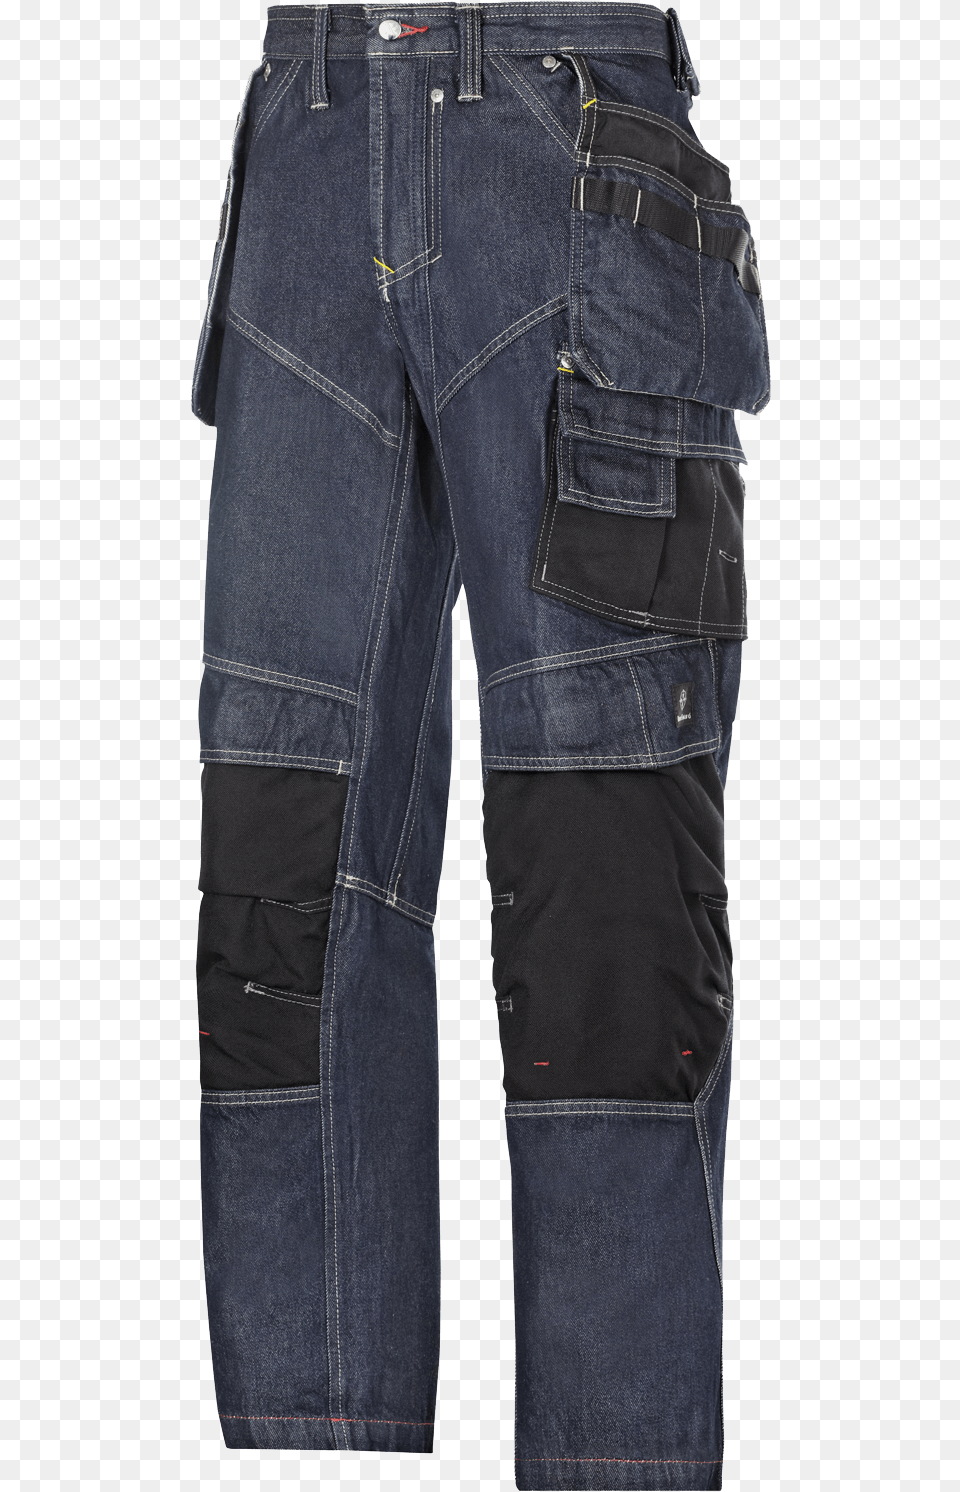 Work Jeans Transparent Image Snickers Denim Work Trousers, Clothing, Pants Png